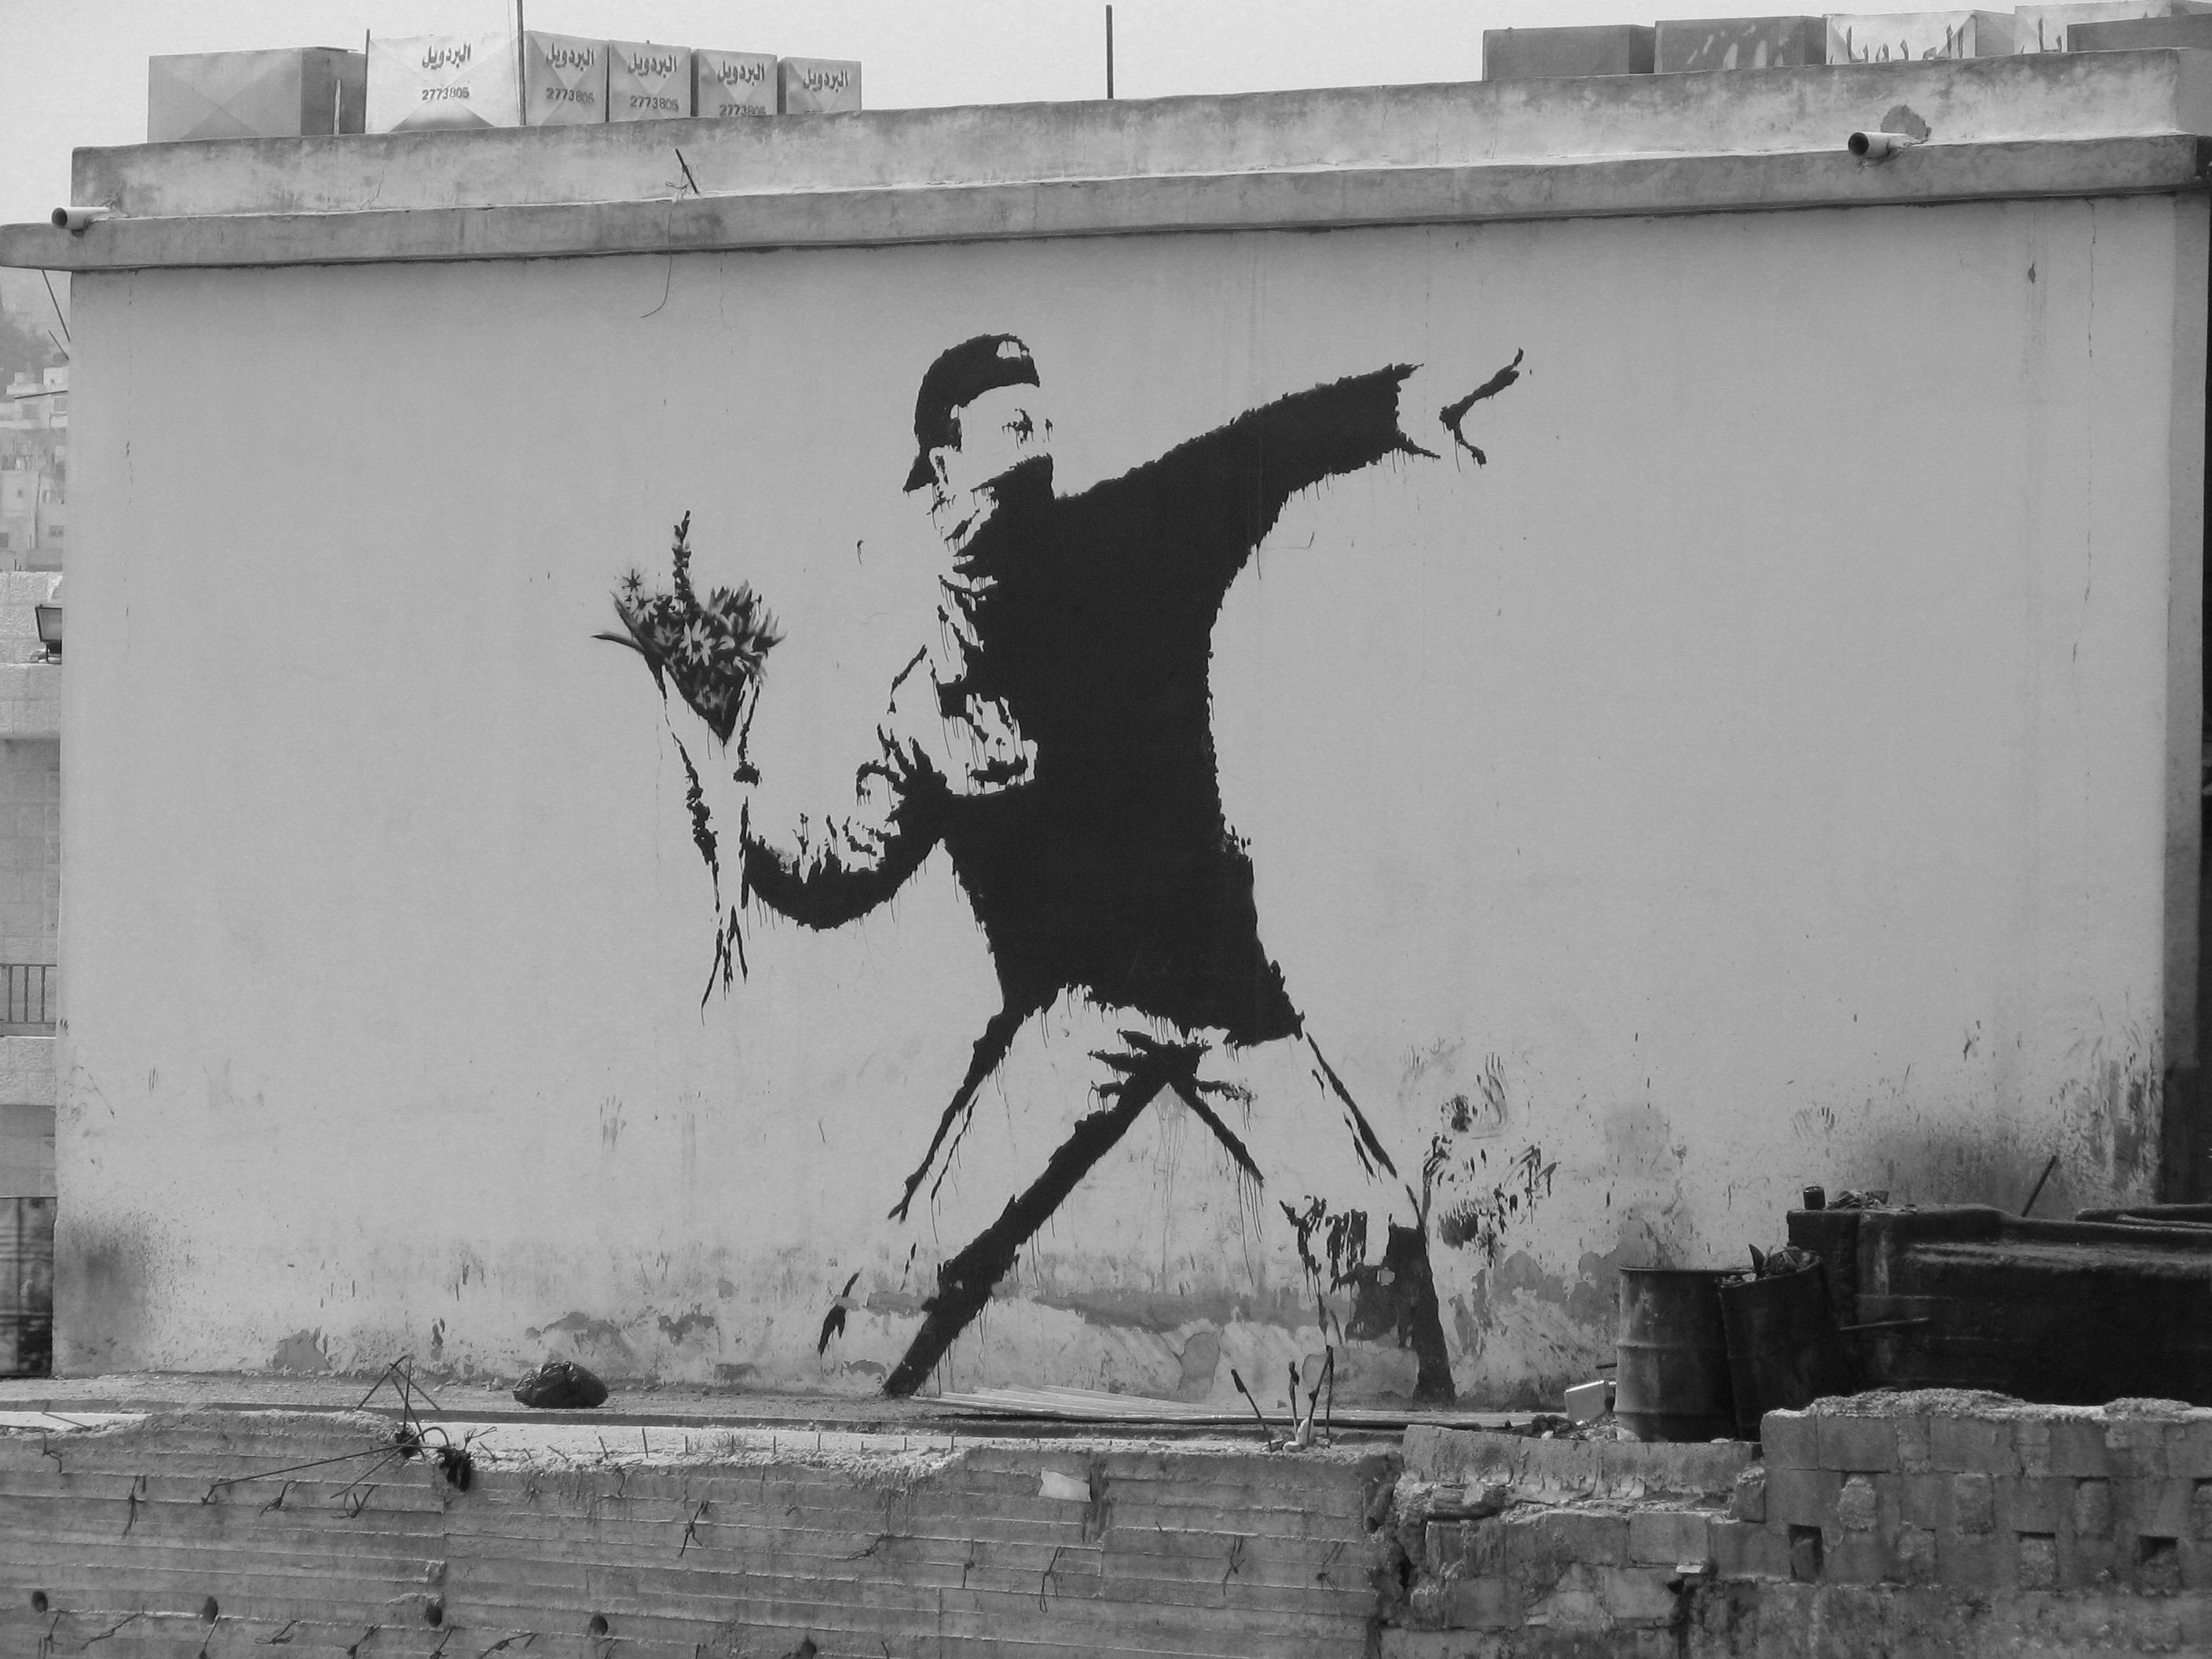 2816x2112 Wallpapers For > Banksy Wallpaper For Mac